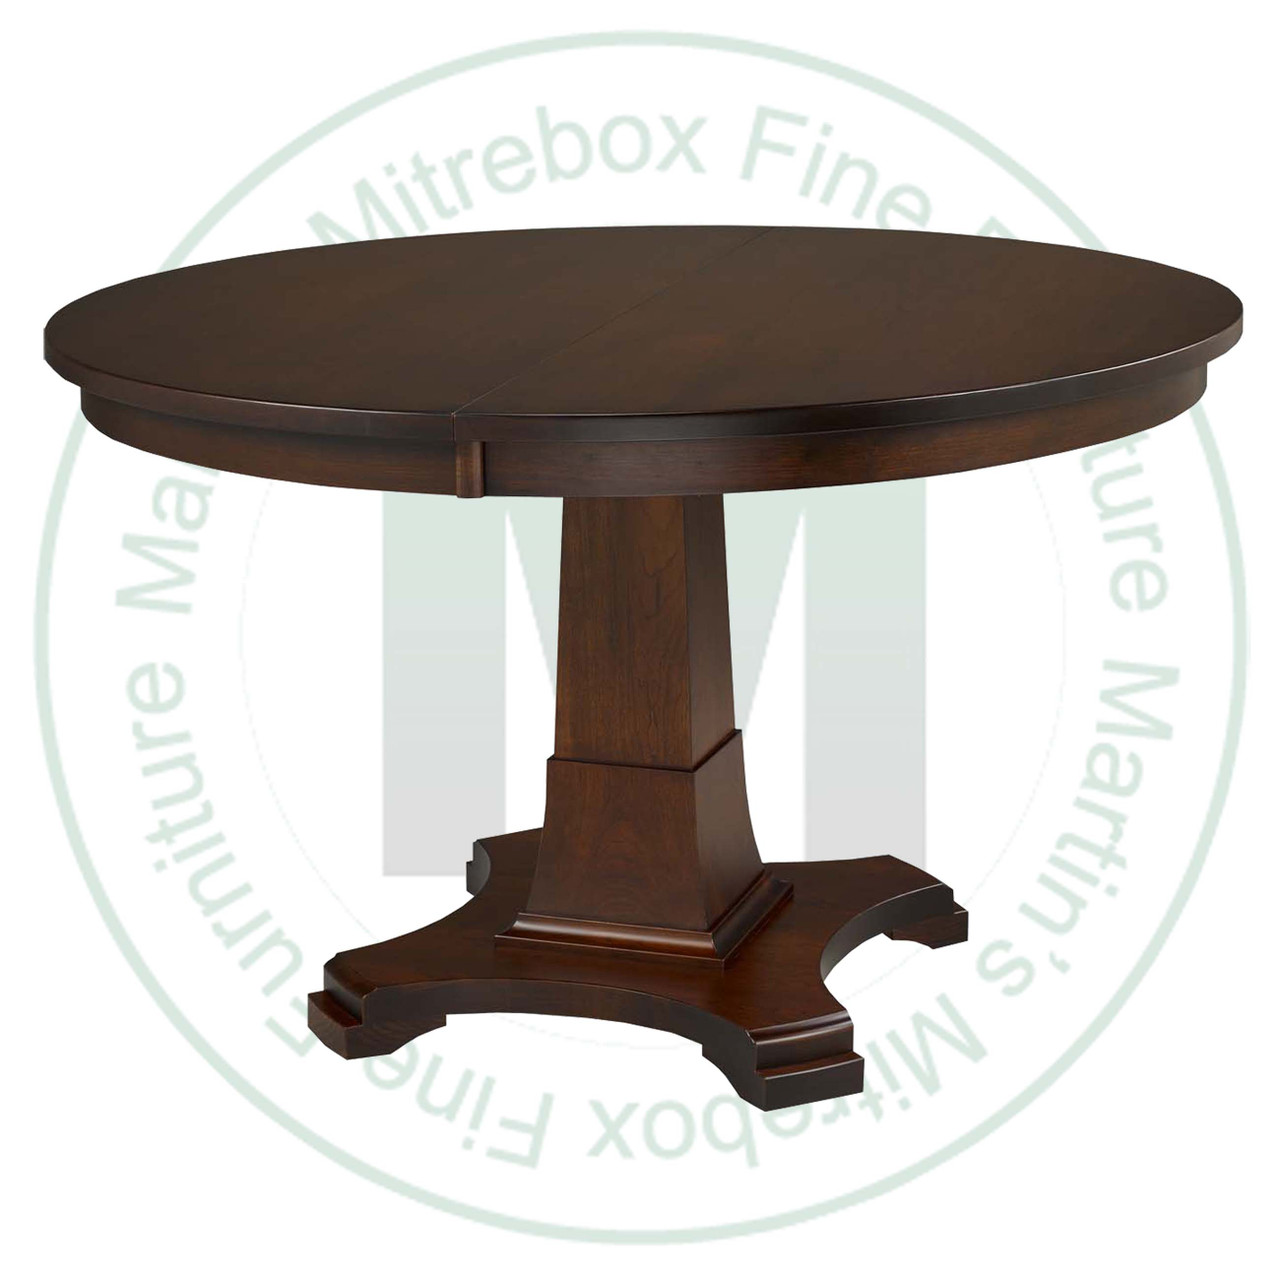 Oak Abbey Single Pedestal Table 36''D x 48''W x 30''H With 1 - 12'' Leaf. Table Has 1'' Thick Top